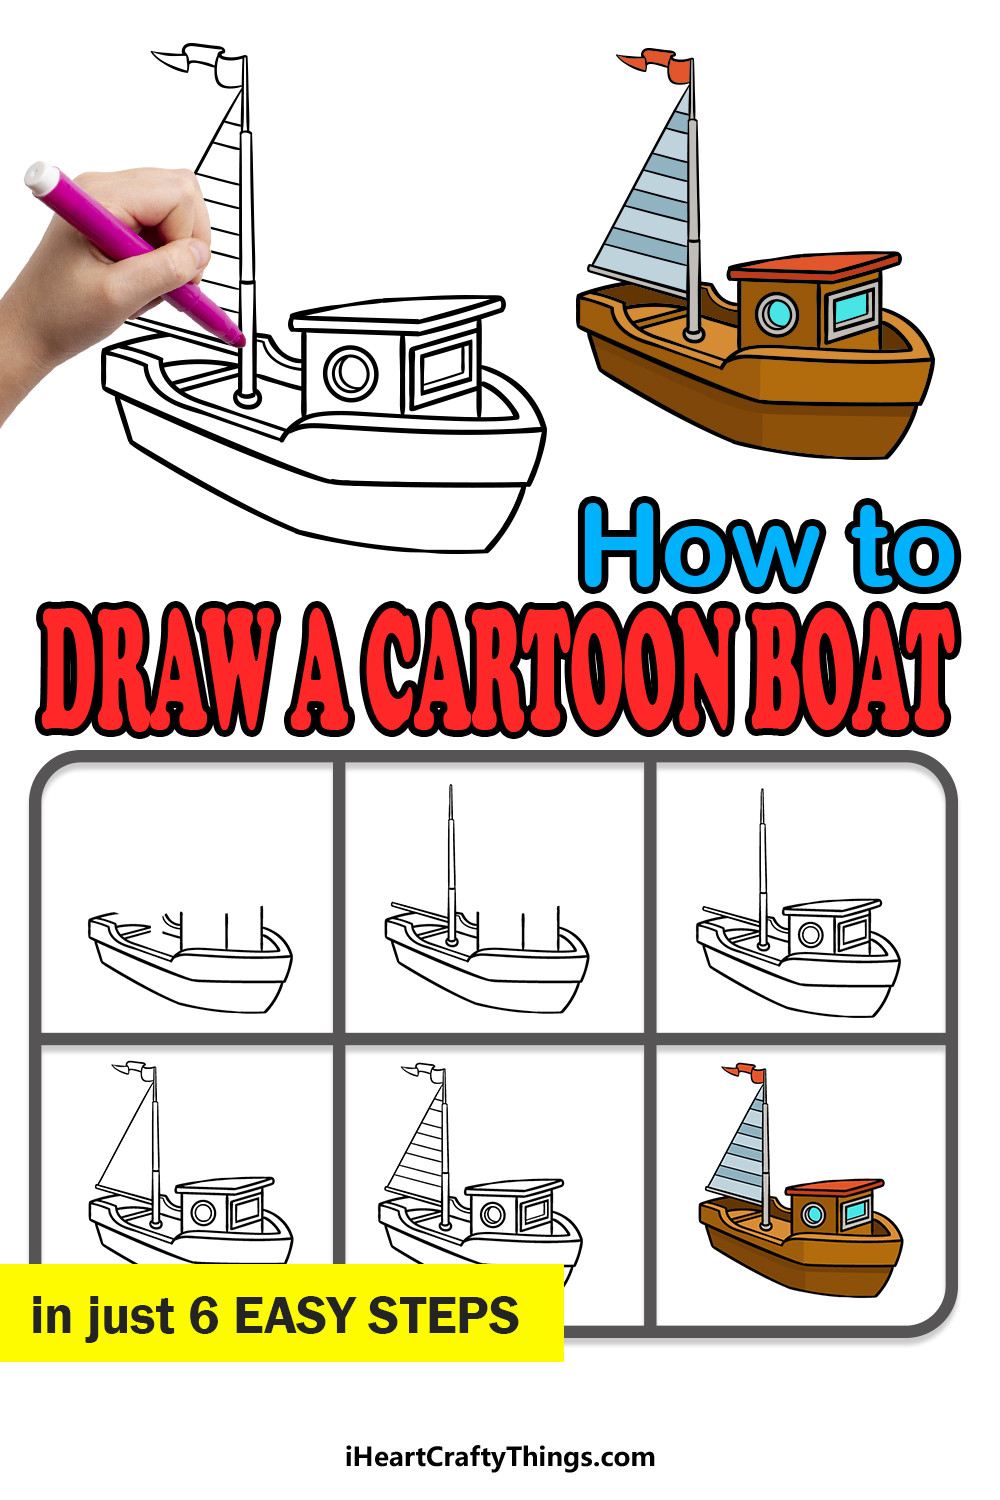 how to draw a cartoon boat in 8 easy steps